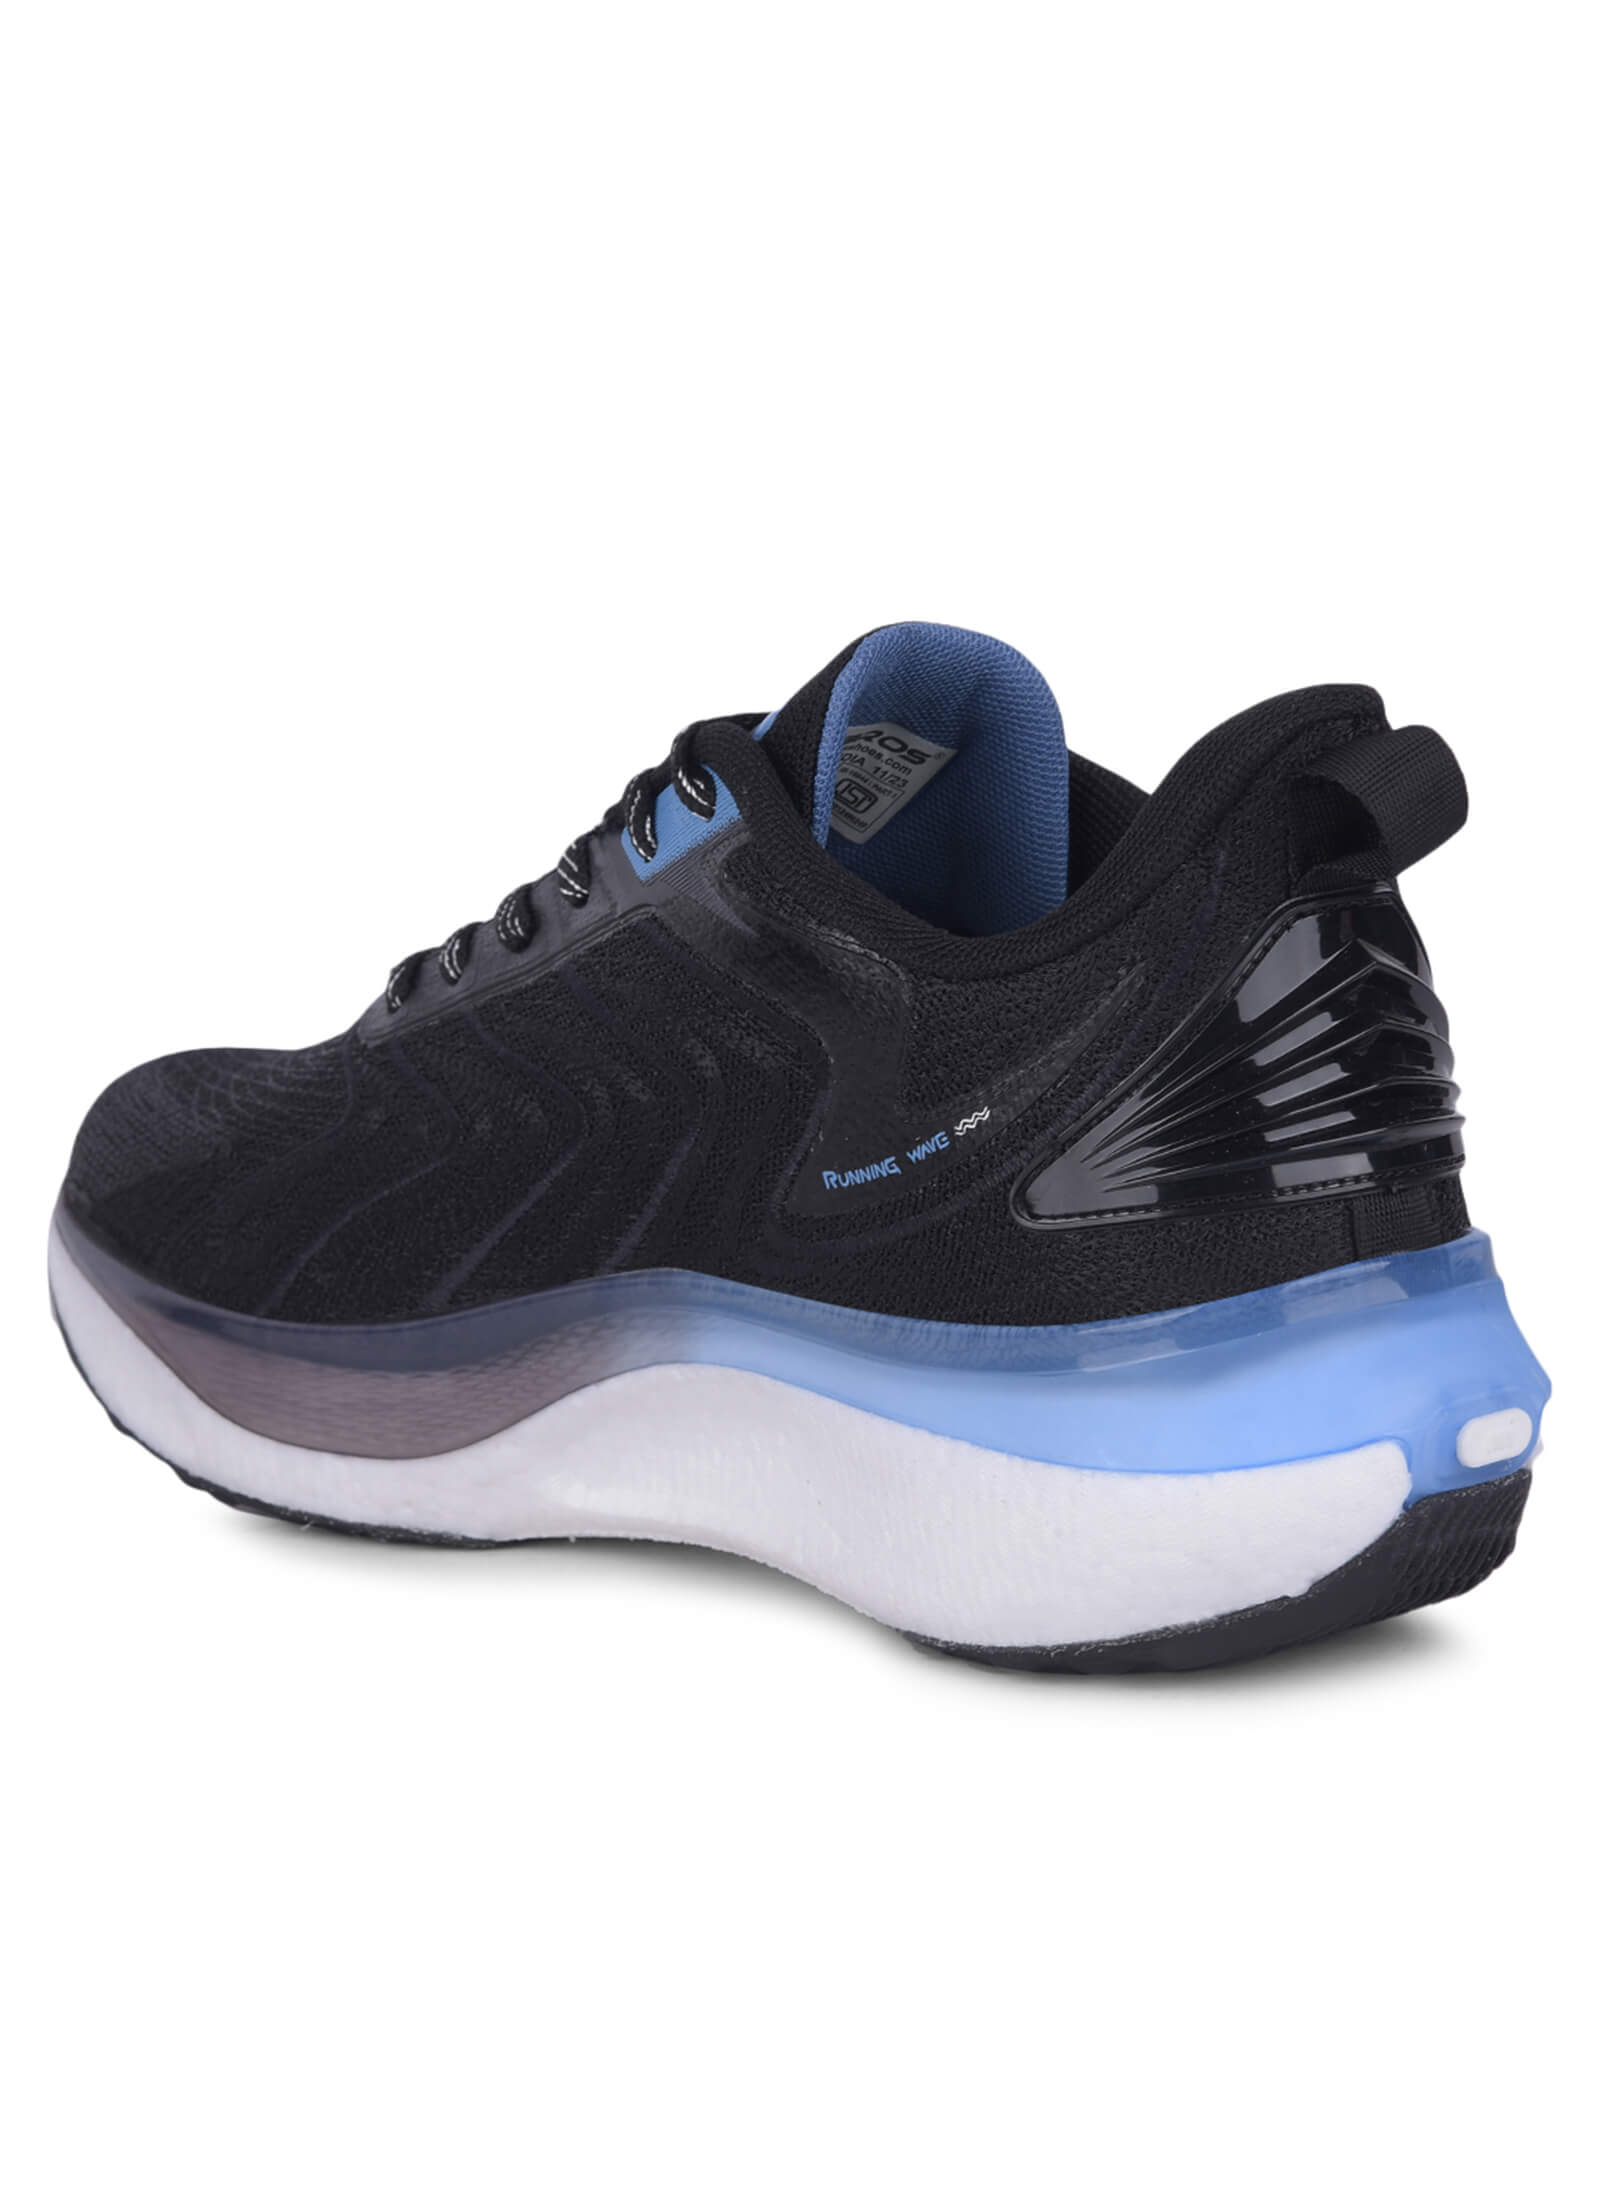 Crypto Hyper Fuse Sports Shoes For Men